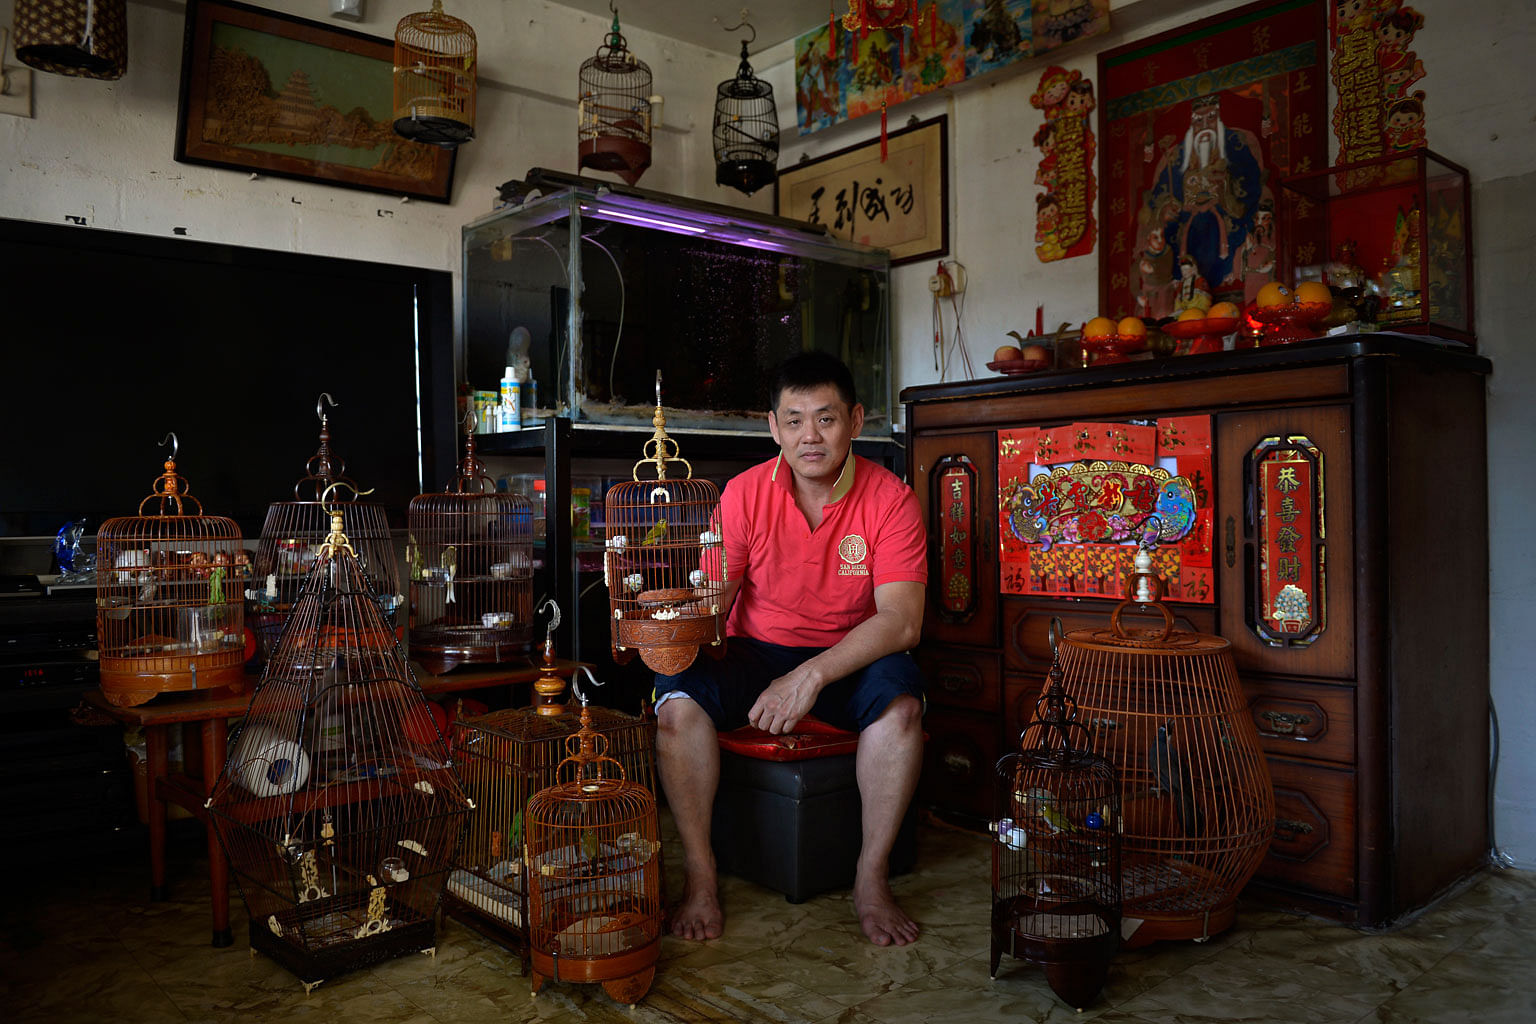 Mr Eric Ang, 46, with his pet birds in his living room. Mr Ang has lived in the estate all his life, and says that if he had the choice, he would not leave. He currently spends his time at home taking care of his bedridden elderly mother.